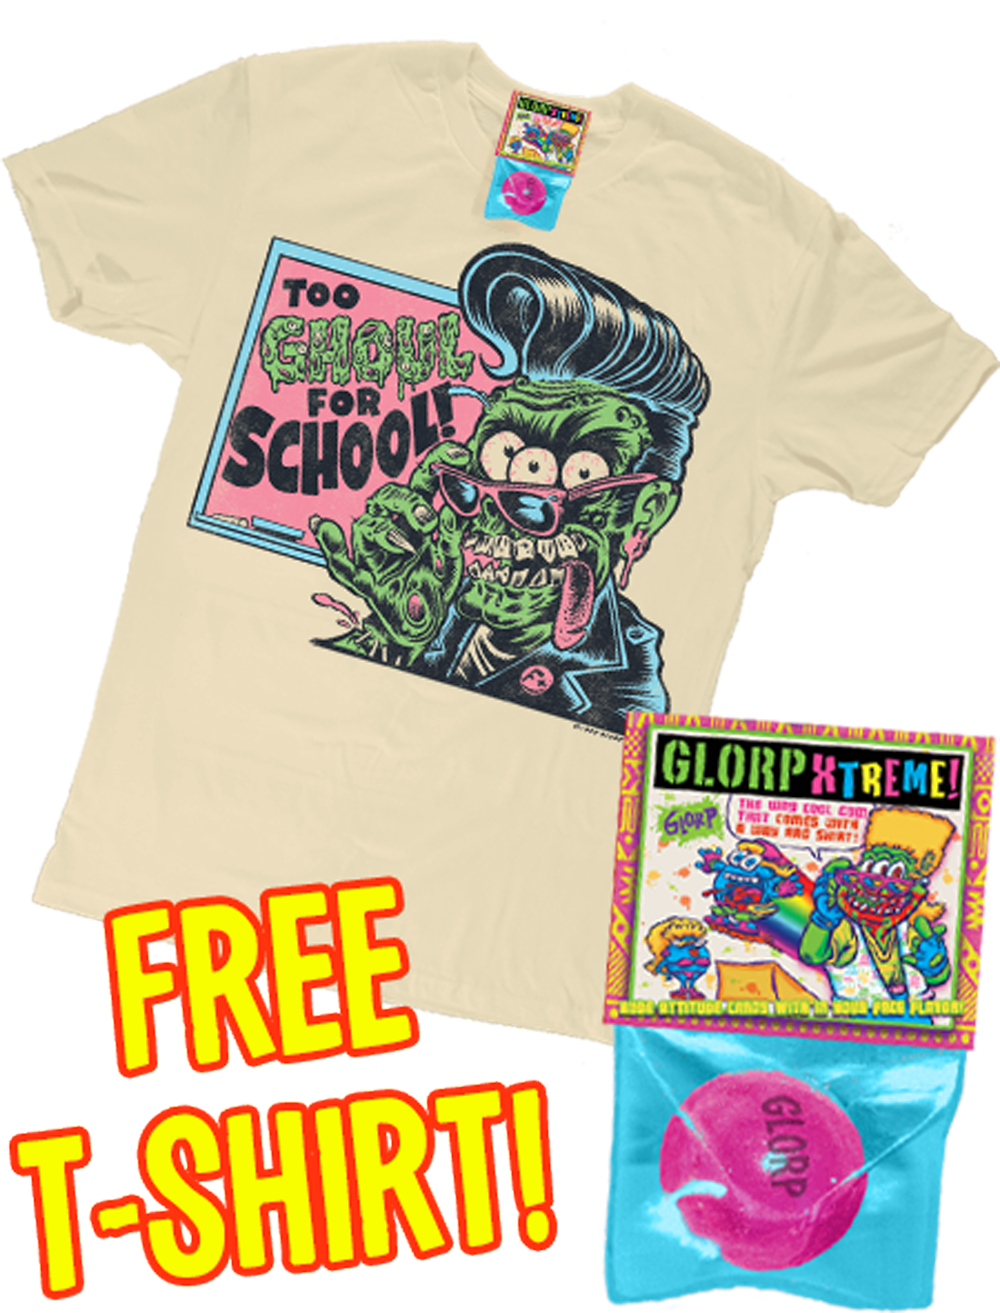 GLORP Fright Bite! (With FREE Too Ghoul for School T-Shirt)